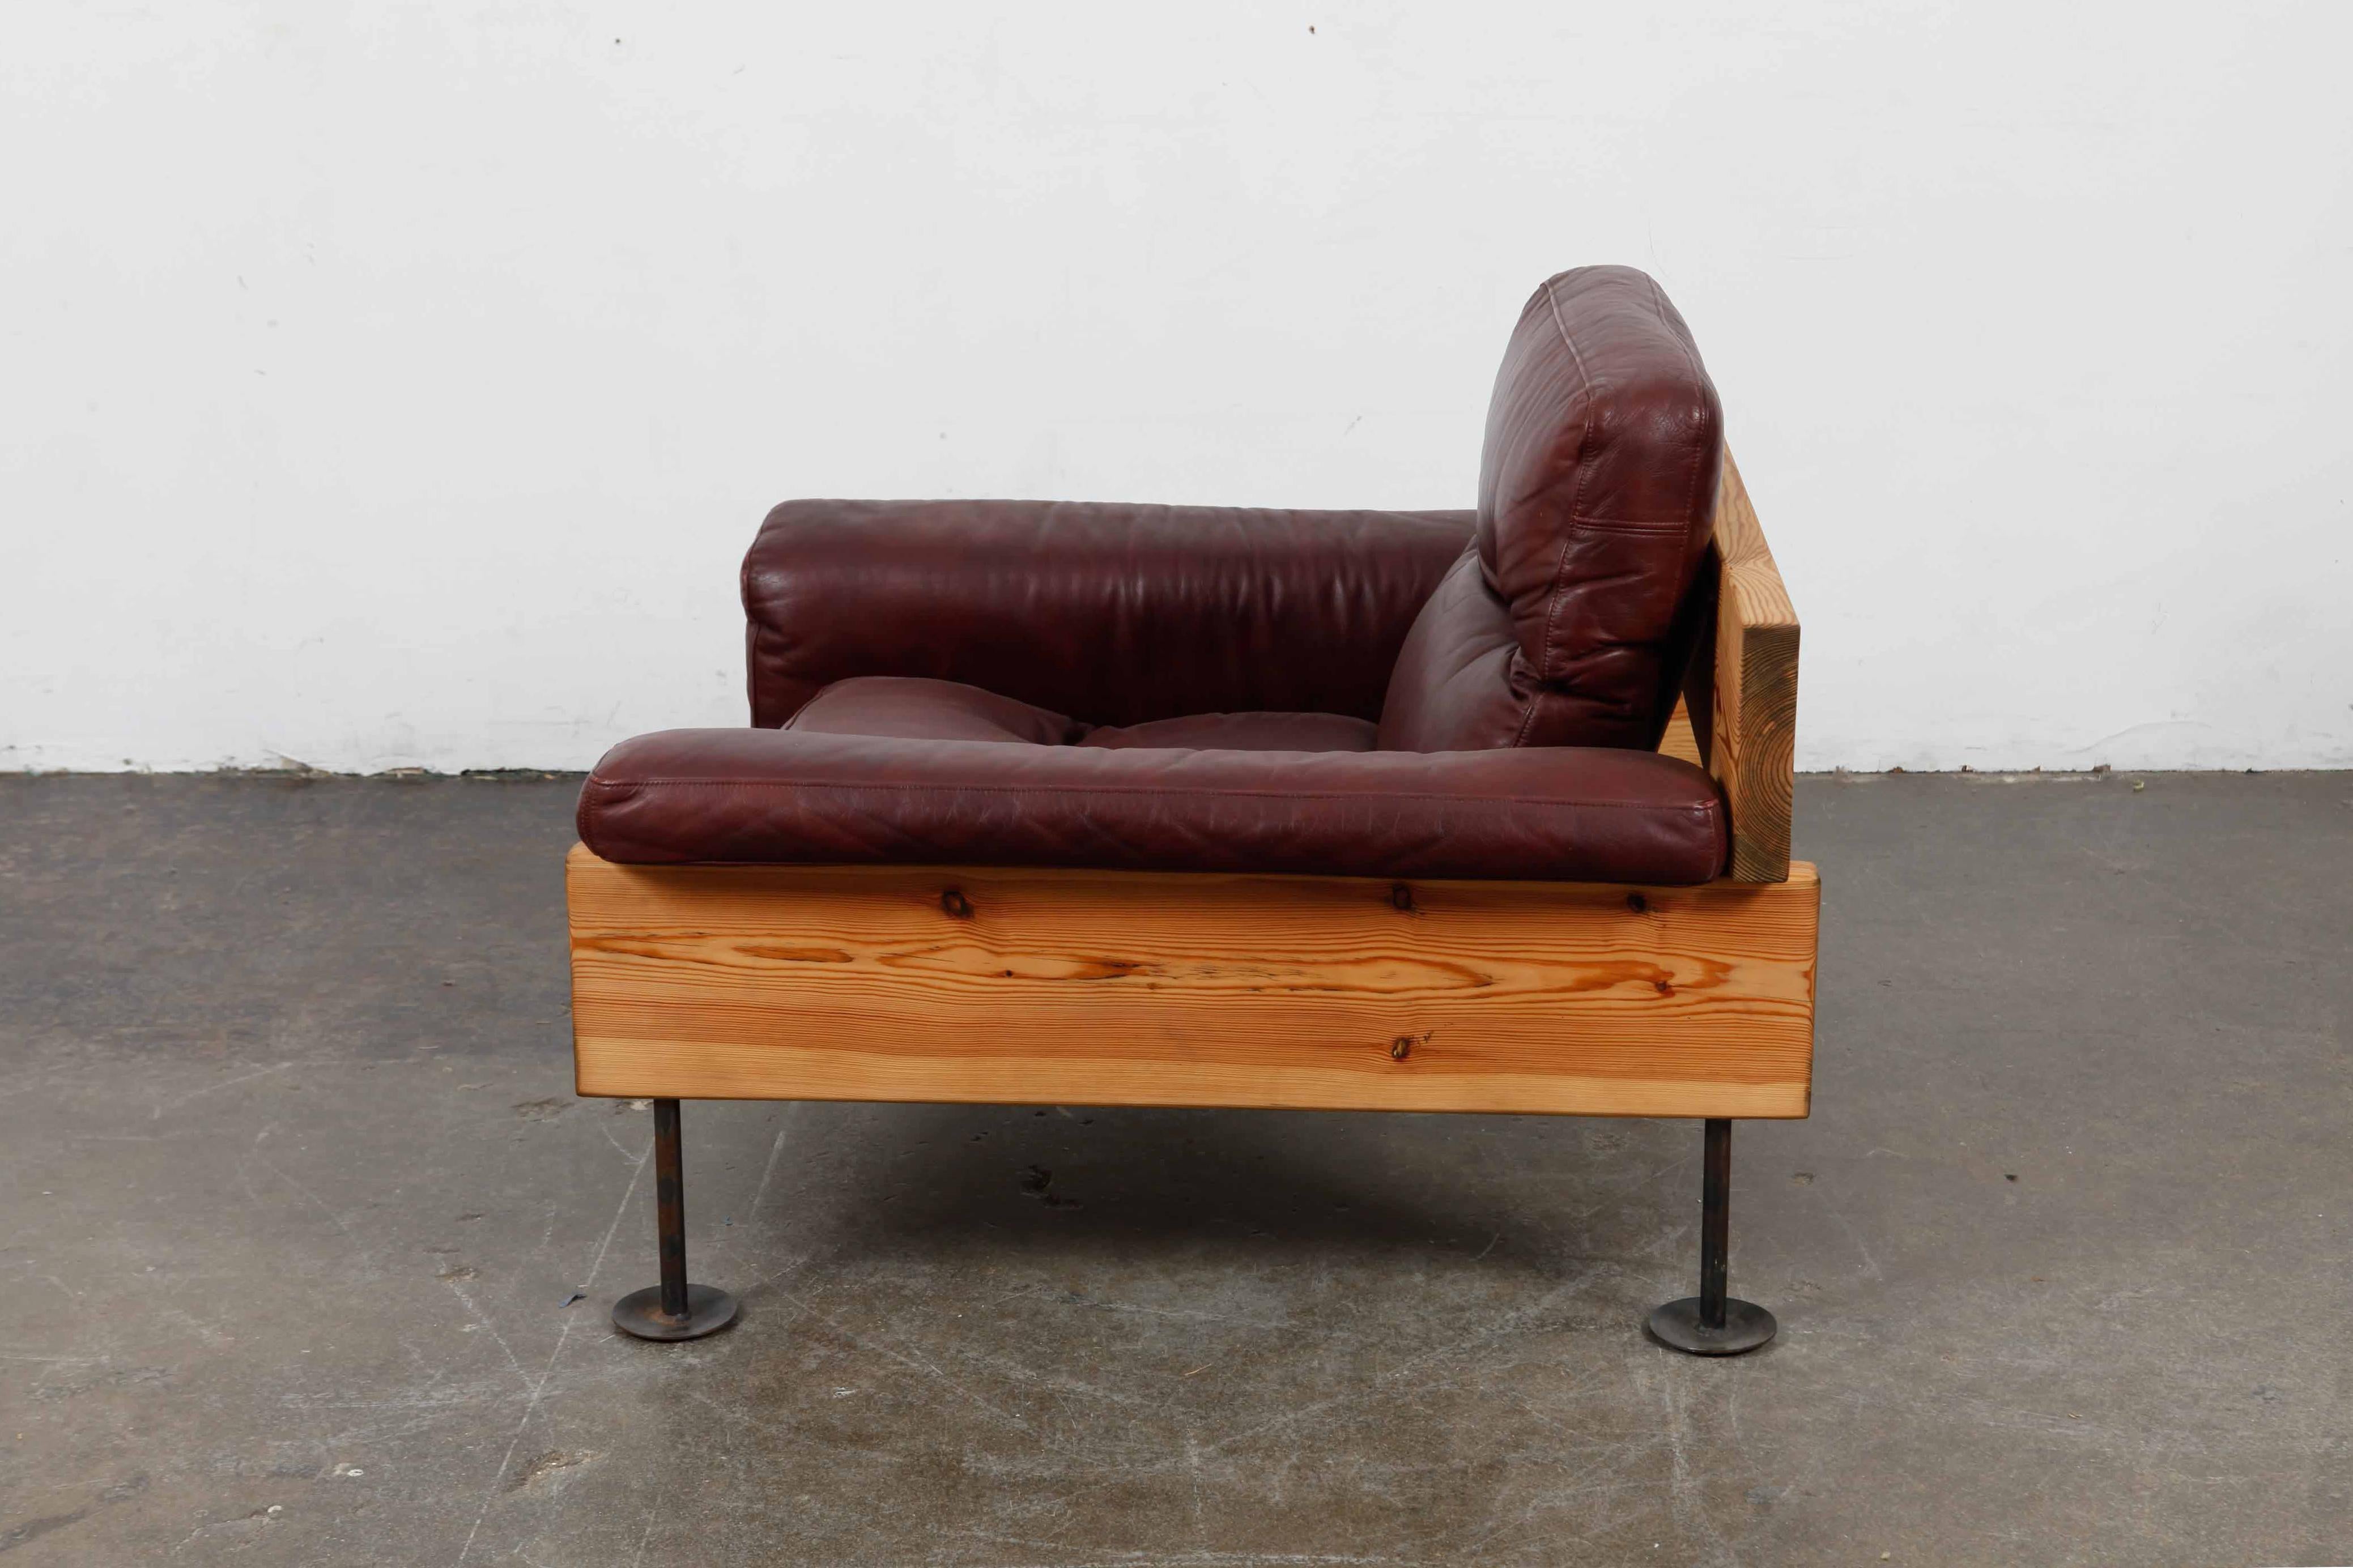 Late 20th Century Low Finnish Lounge Chair by Hannu Jyräs in Solid Pine with Original Leather